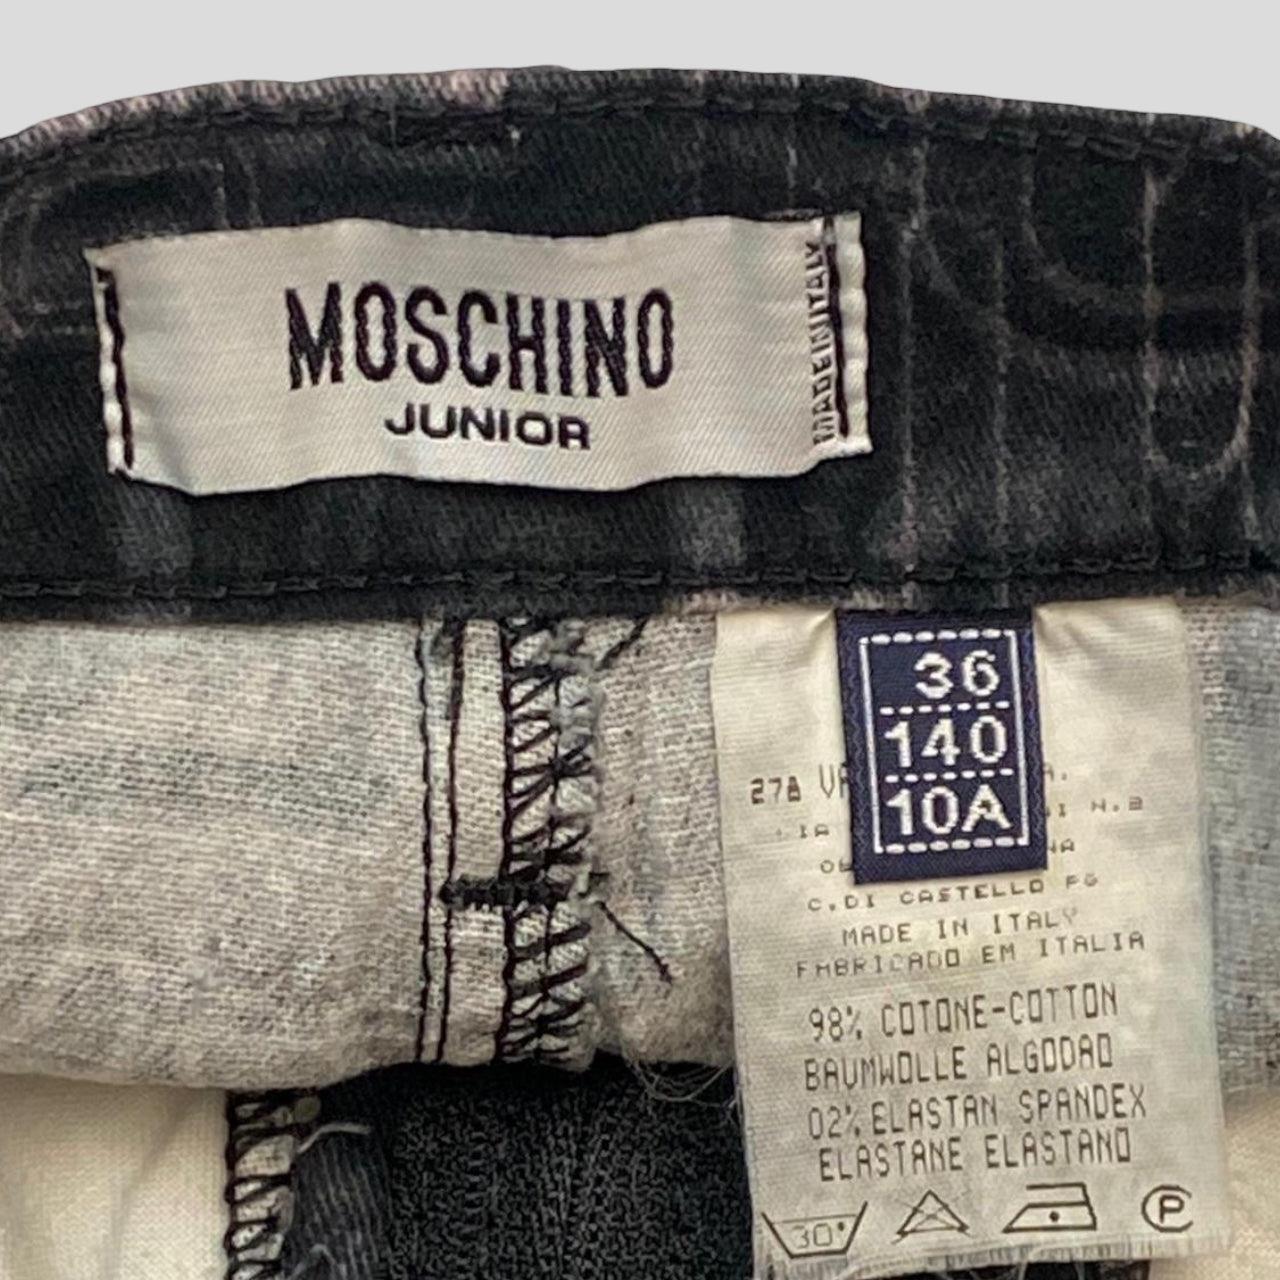 Moschino Jeans 2000 Future Miniskirt - 4/6 - Known Source